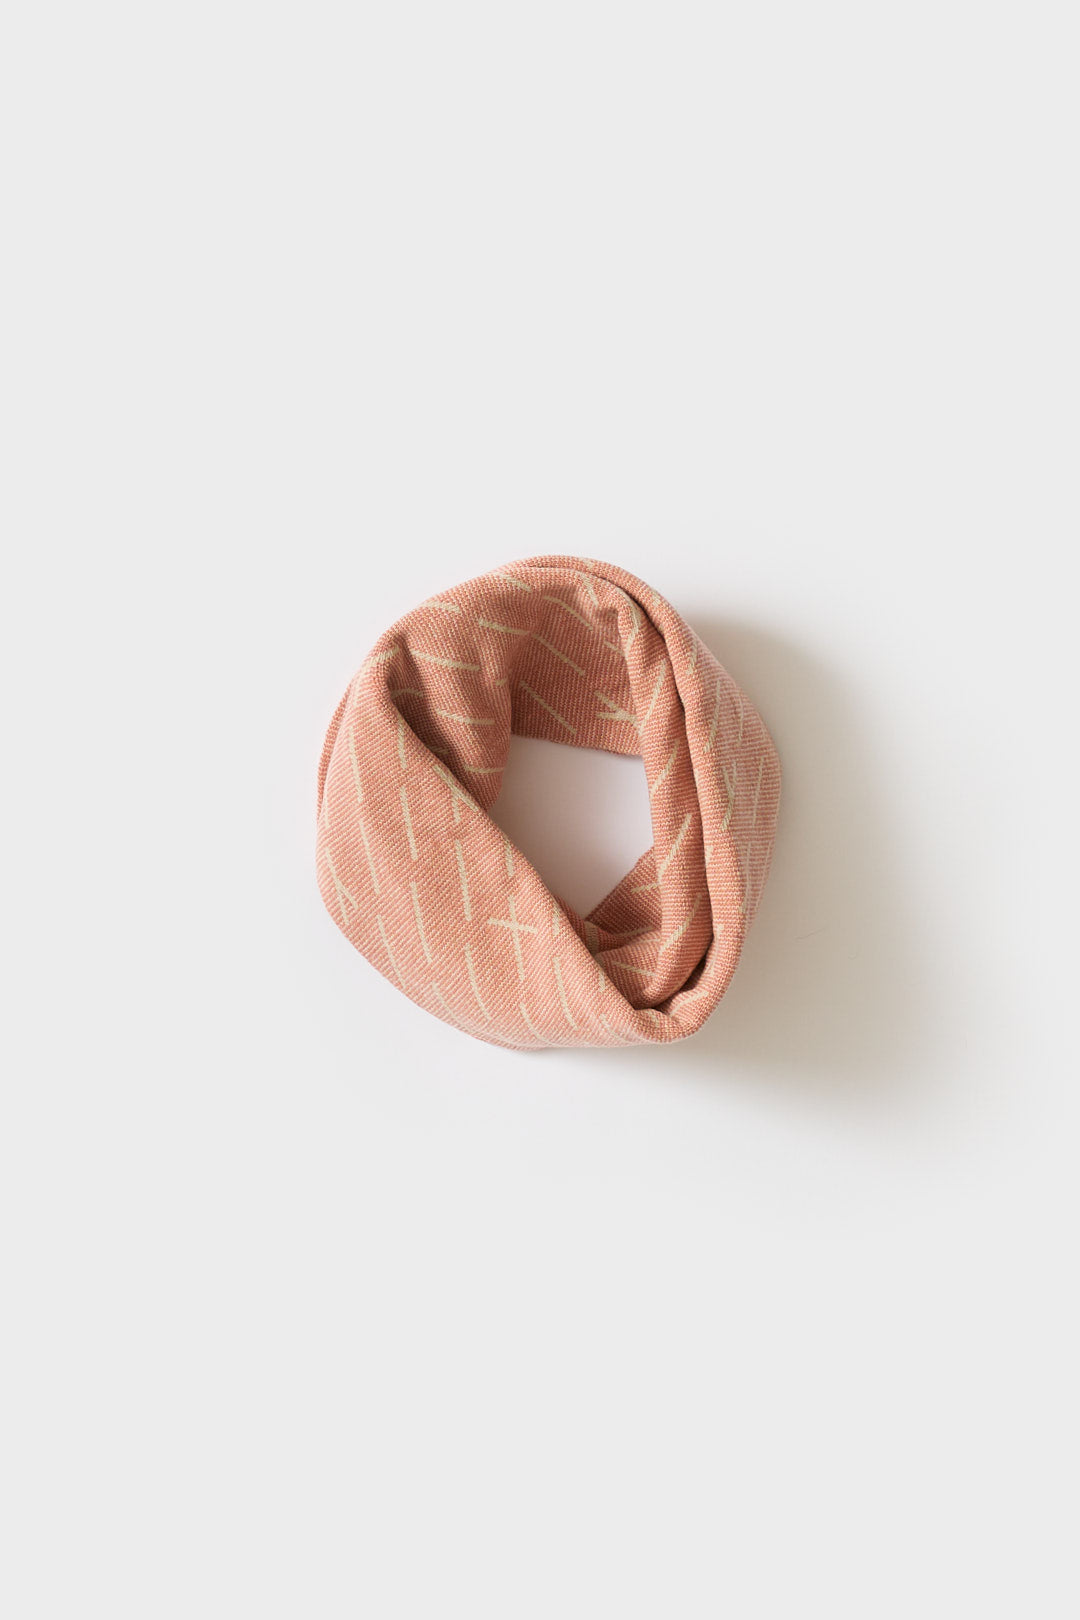 Circle Scarf "Forest" - Rosehip & Oatmeal